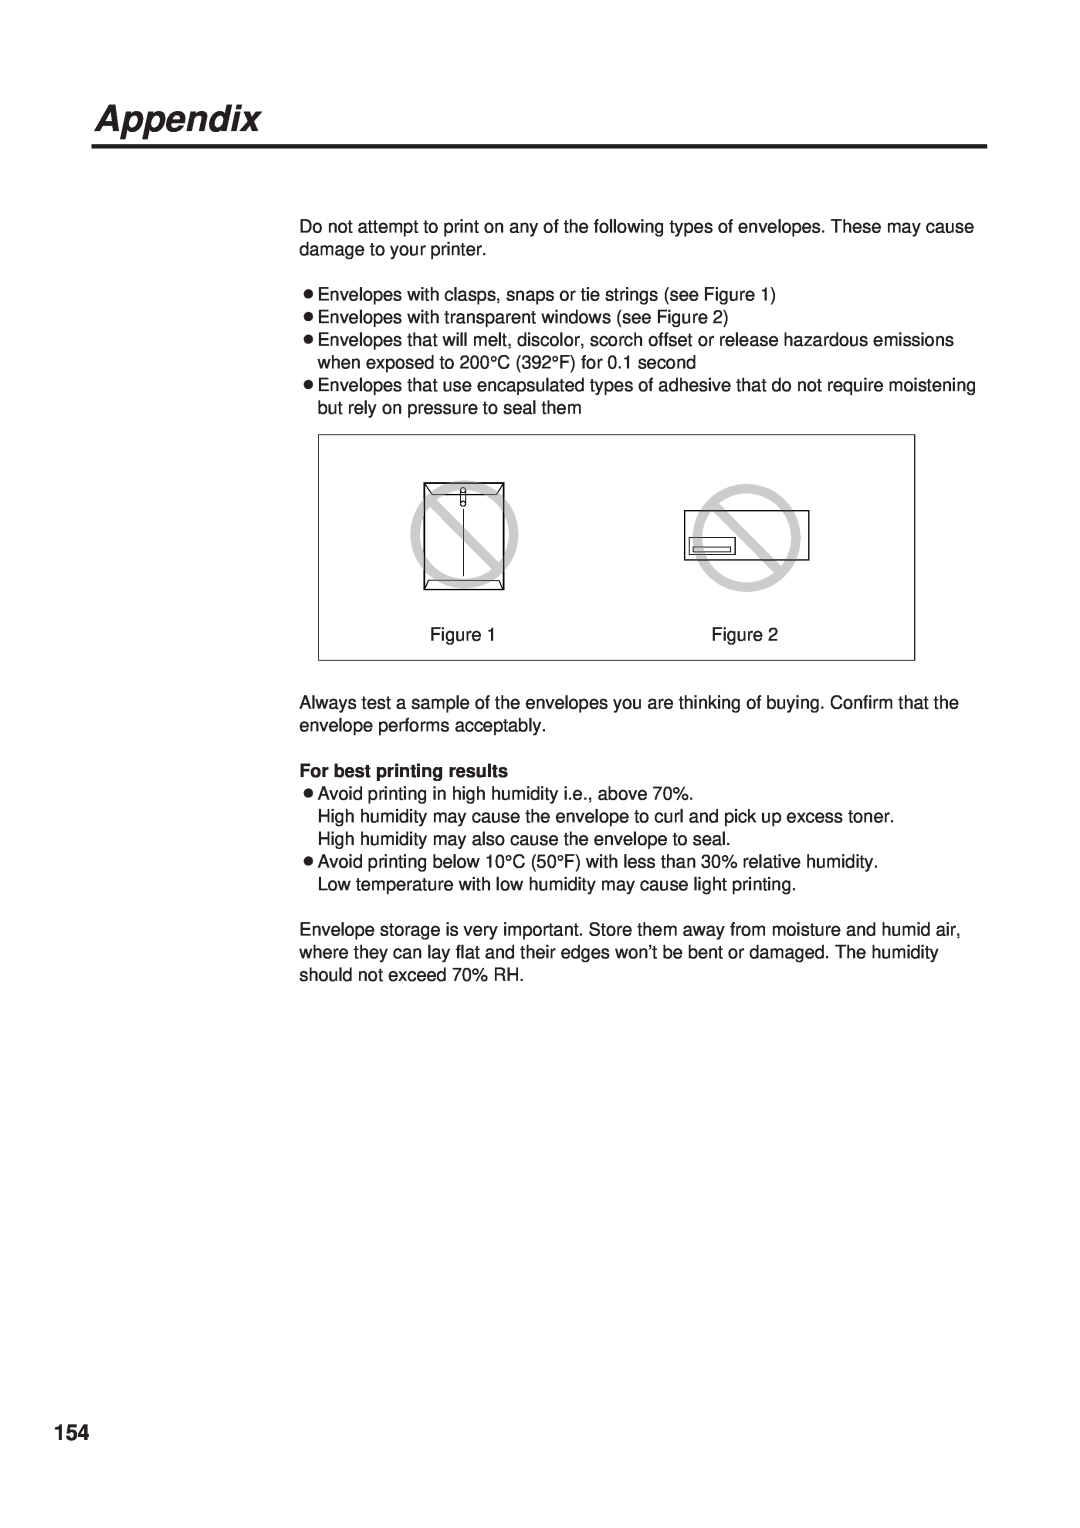 Panasonic KX-PS8000 manual Appendix, For best printing results 